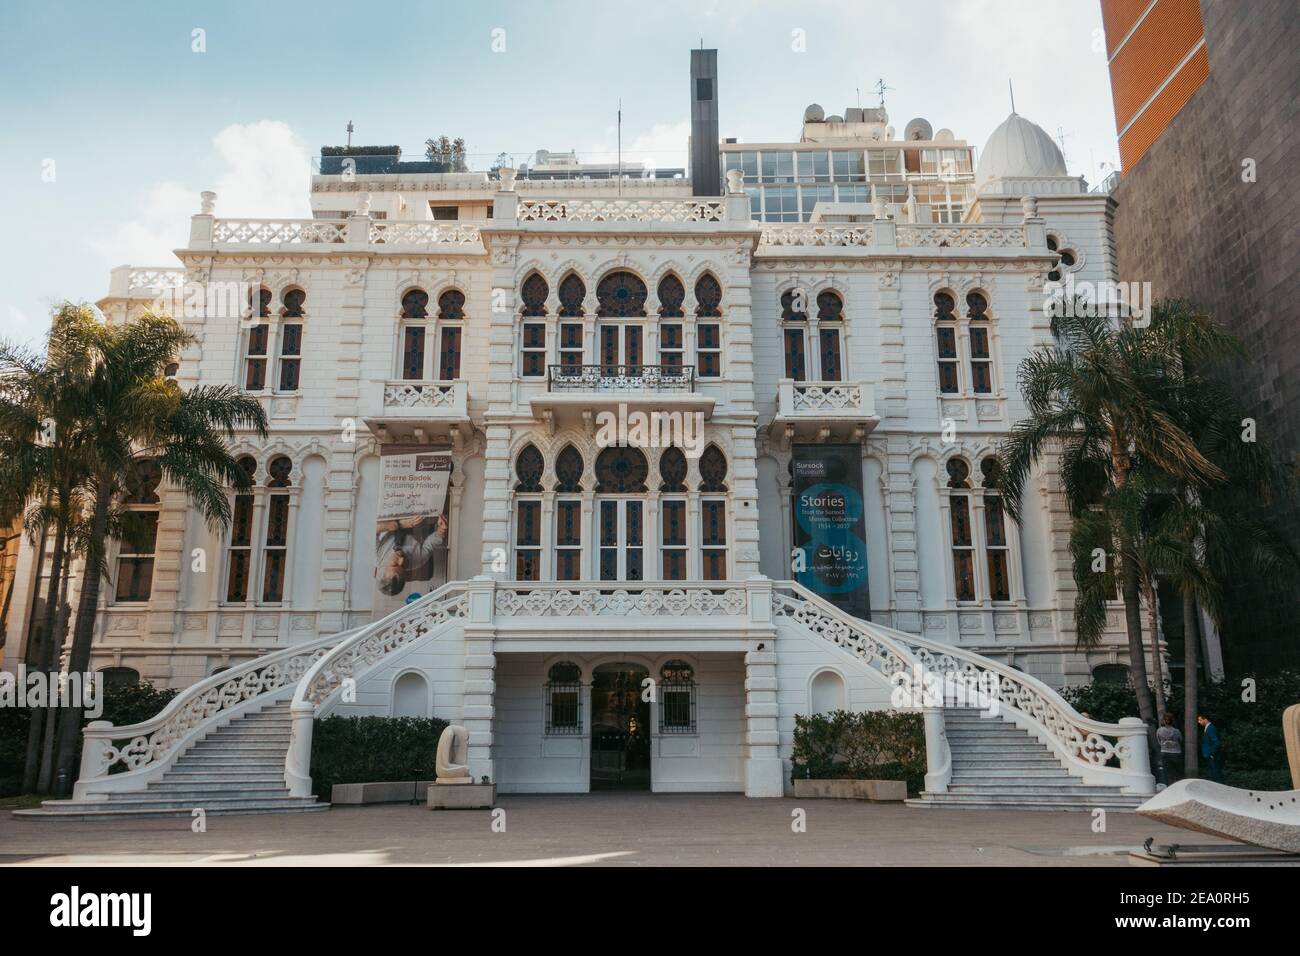 The ornate exterior of the Sursock Museum in Beirut, Lebanon Stock Photo